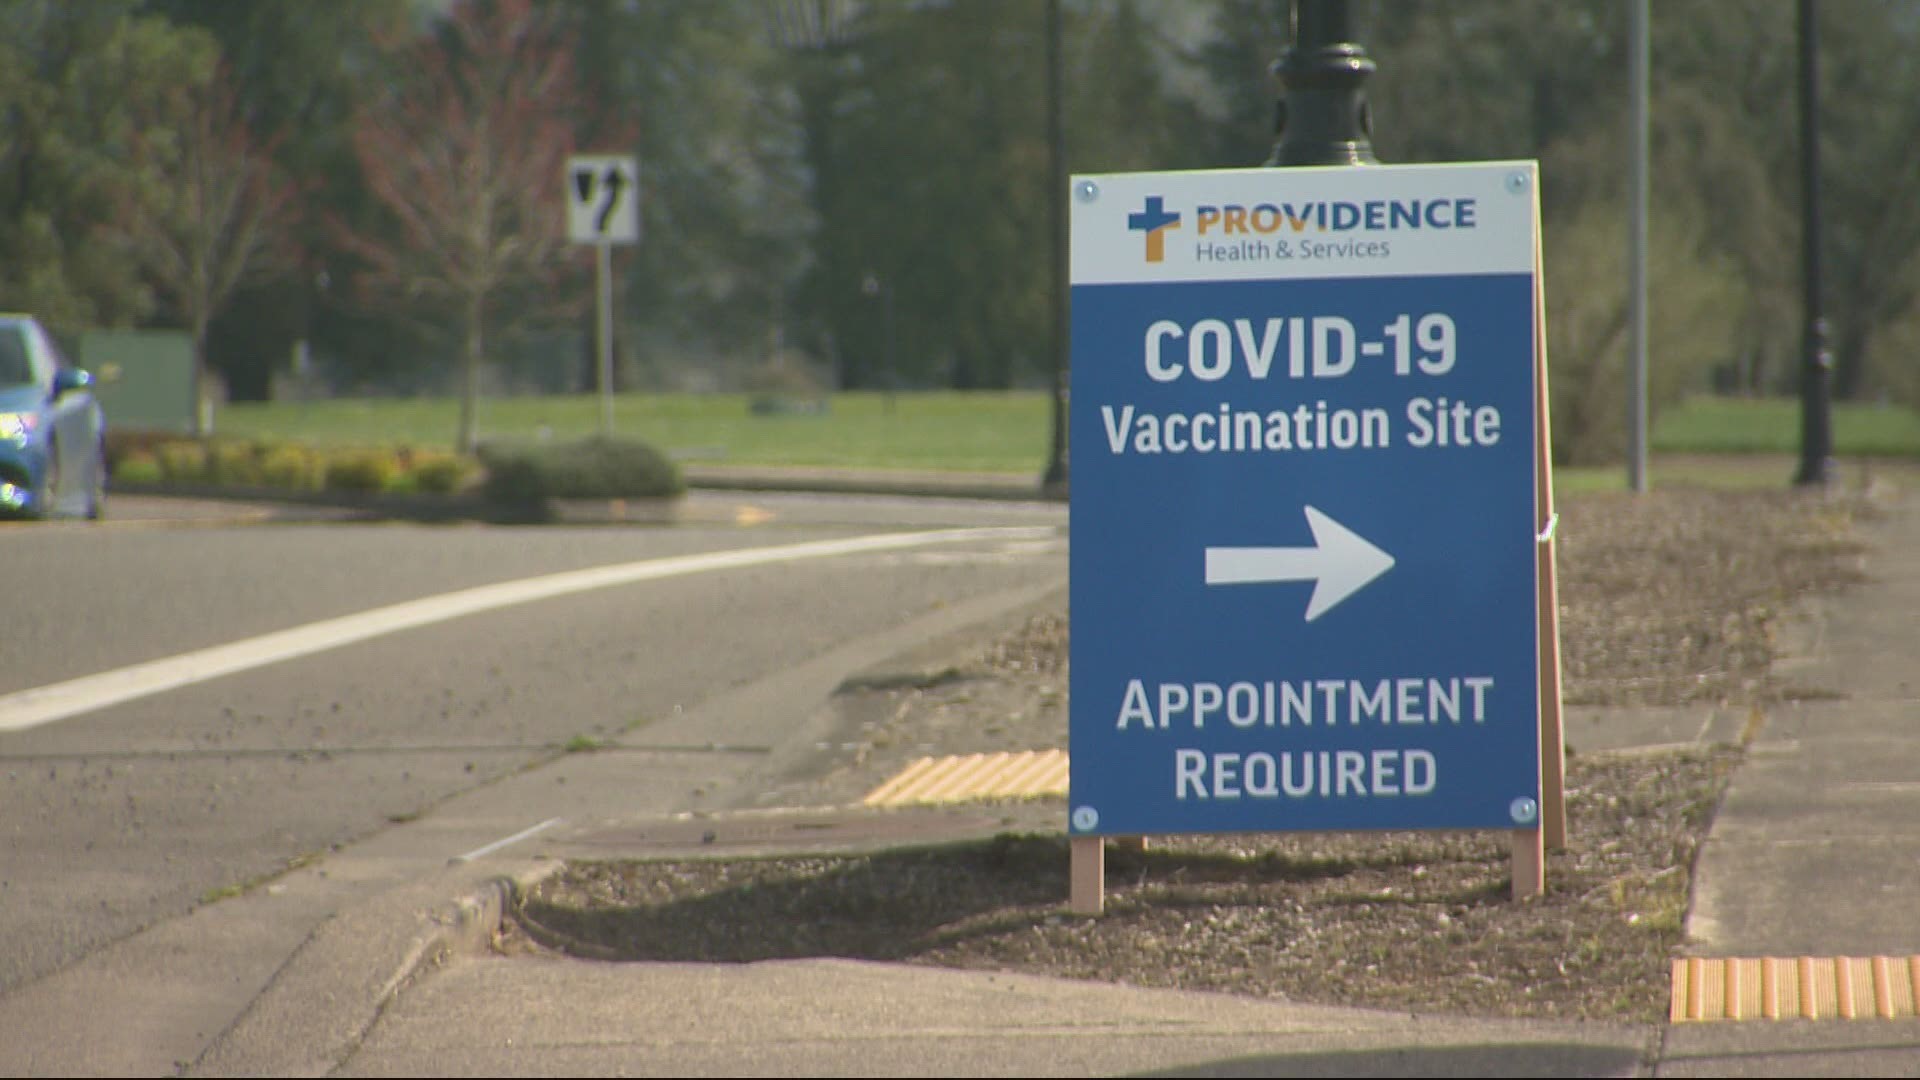 Each Saturday, Providence and A-dec hope to vaccinate up to 2,000 people against COVID.